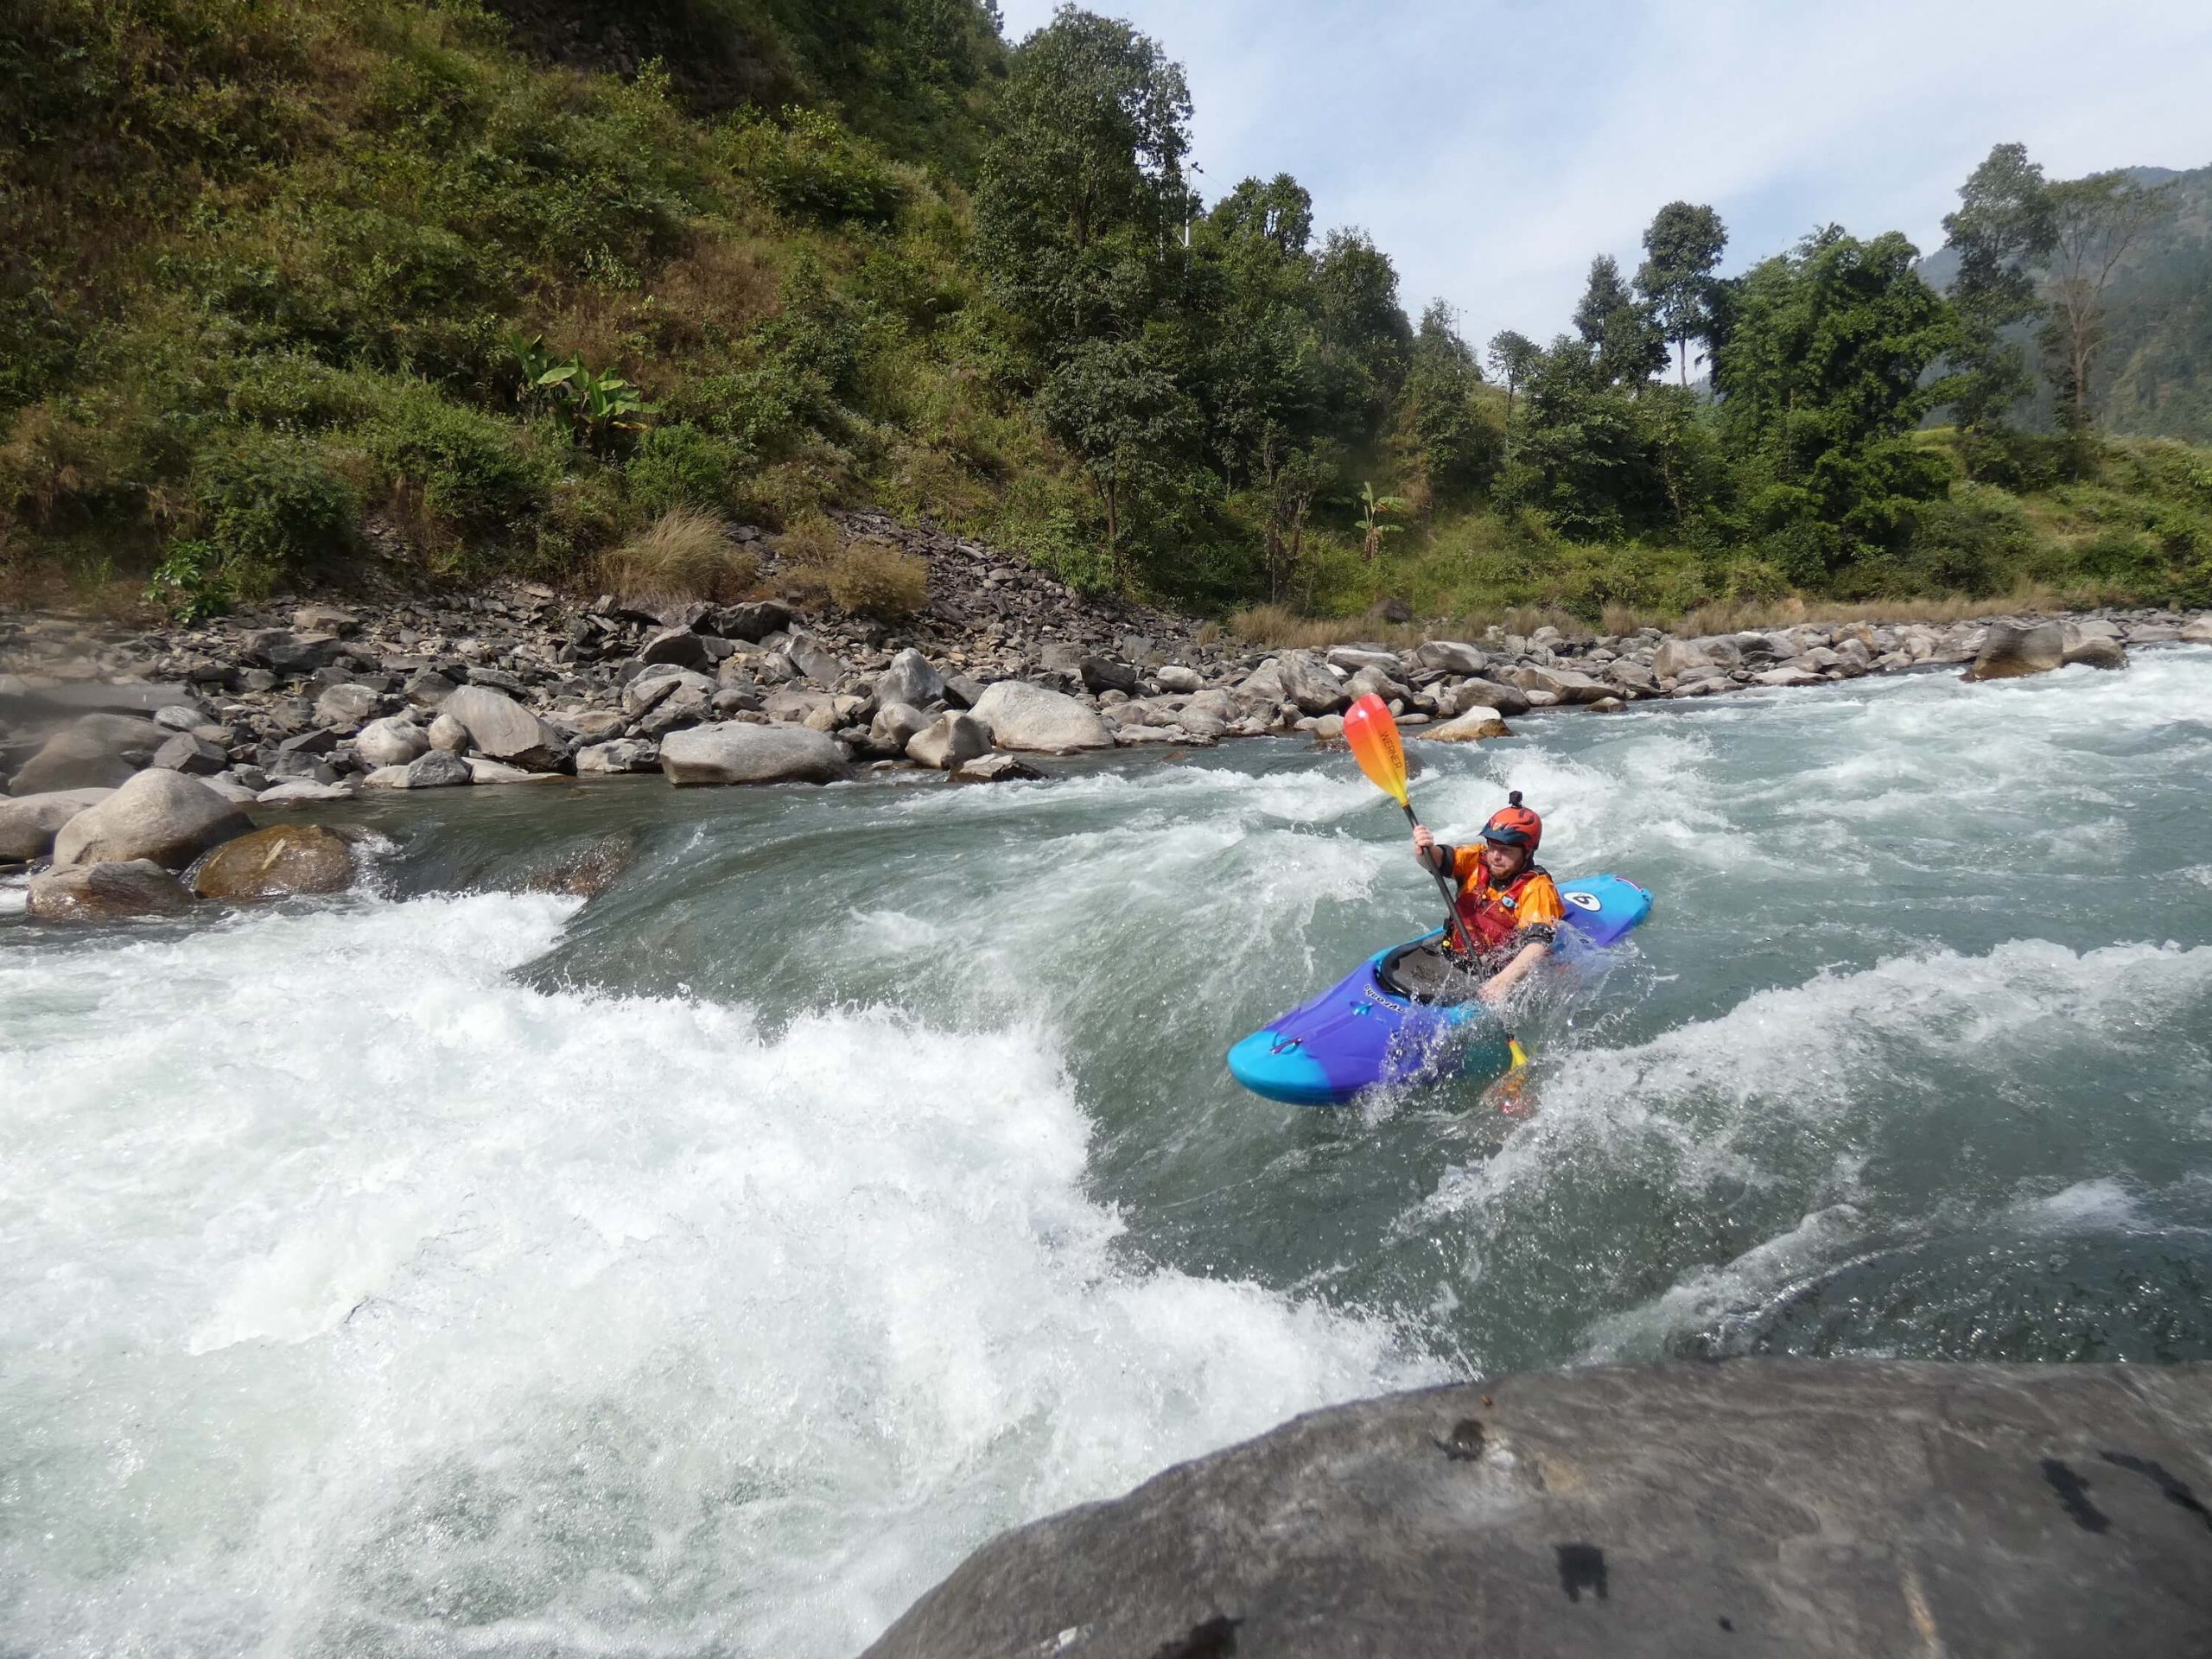 Nepal's fastest-flowing rivers